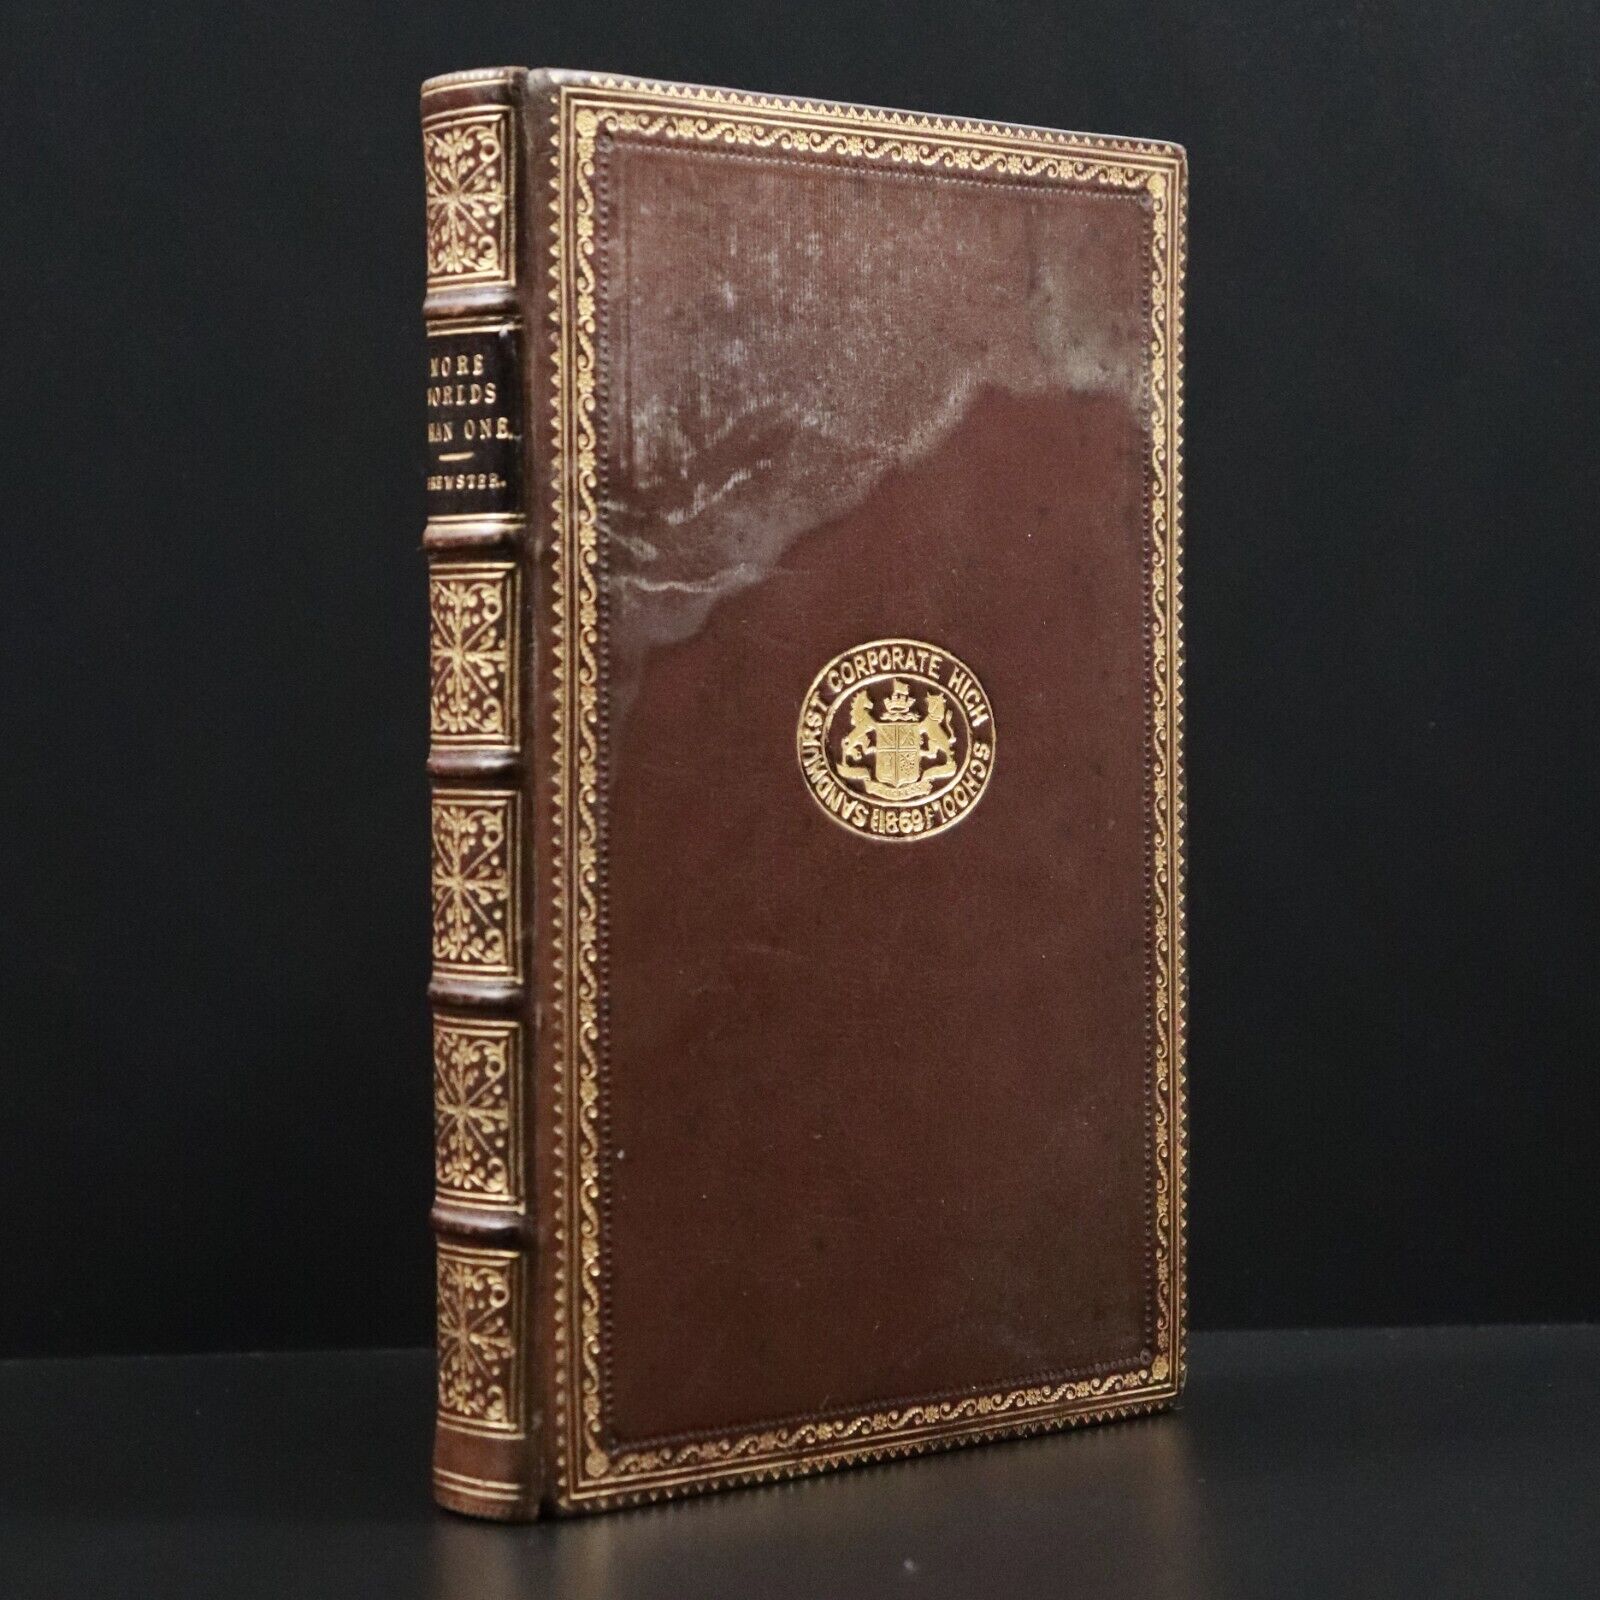 1865 More Worlds Than One by David Brewster Antiquarian Philosophy Book Theology